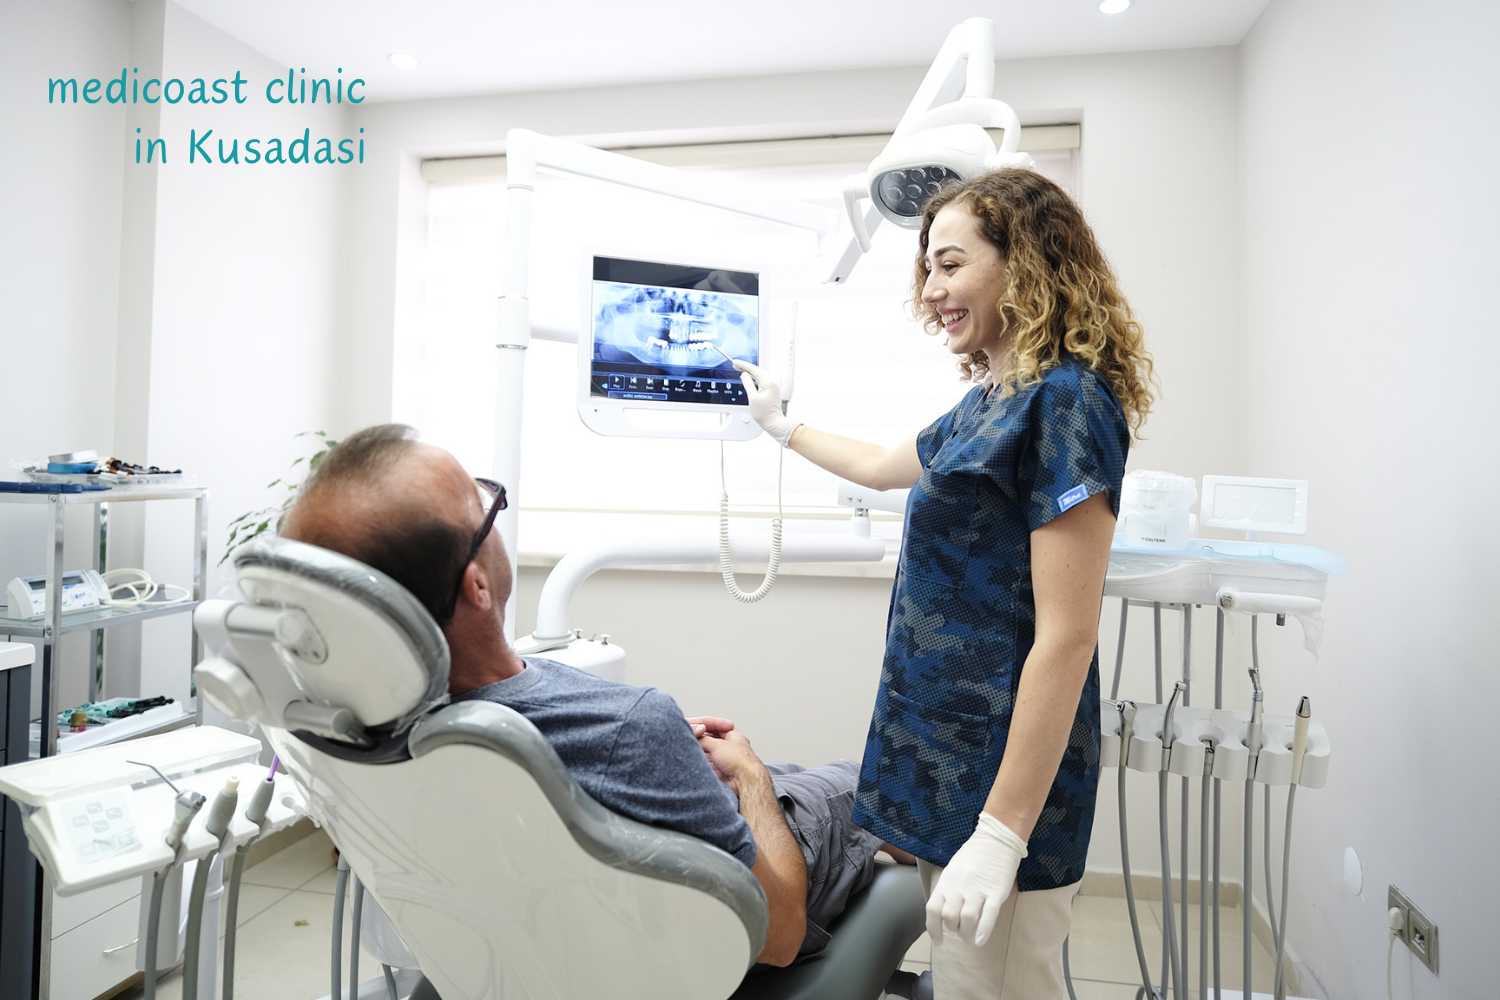 Turkey's premier dental clinics attract a growing number of international visitors, including celebrities, seeking affordable, top-notch dental care. Medicoast Clinics in Kusadasi stand out for their English-speaking staff, cutting-edge technology, skilled professionals, and commitment to excellence, ensuring a hassle-free VIP experience. Highly recommended for their transparent approach and competitive prices, they provide comprehensive guidance and exceptional service from start to finish, making them the go-to choice for the best dental treatment in Turkey.